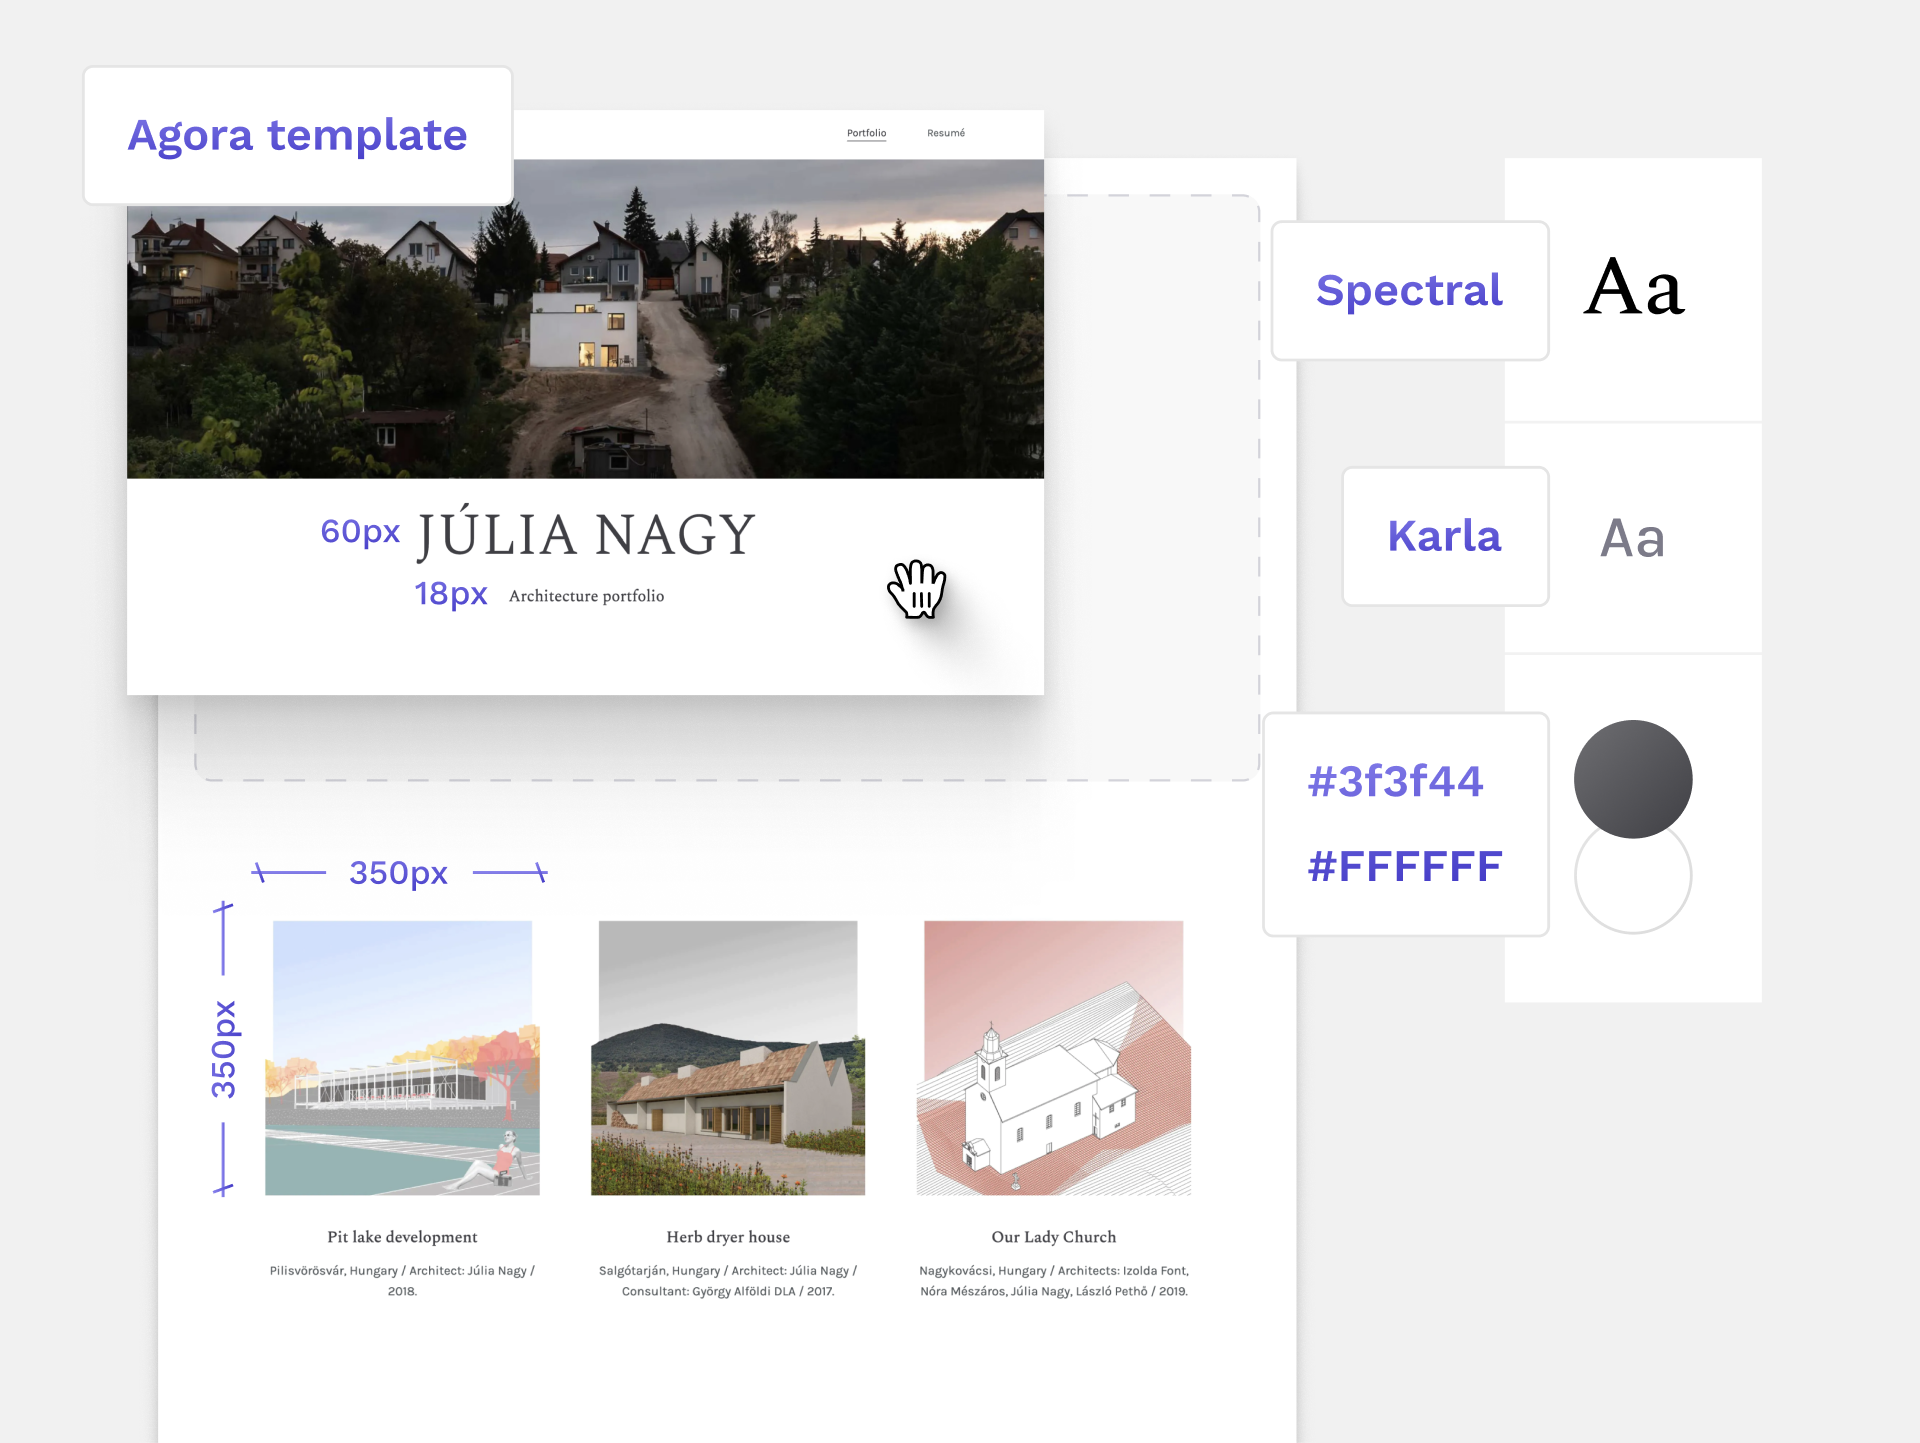 Recreate Júlia Nagy's architecture website design. Colors, font types and sizes are included in this picture.